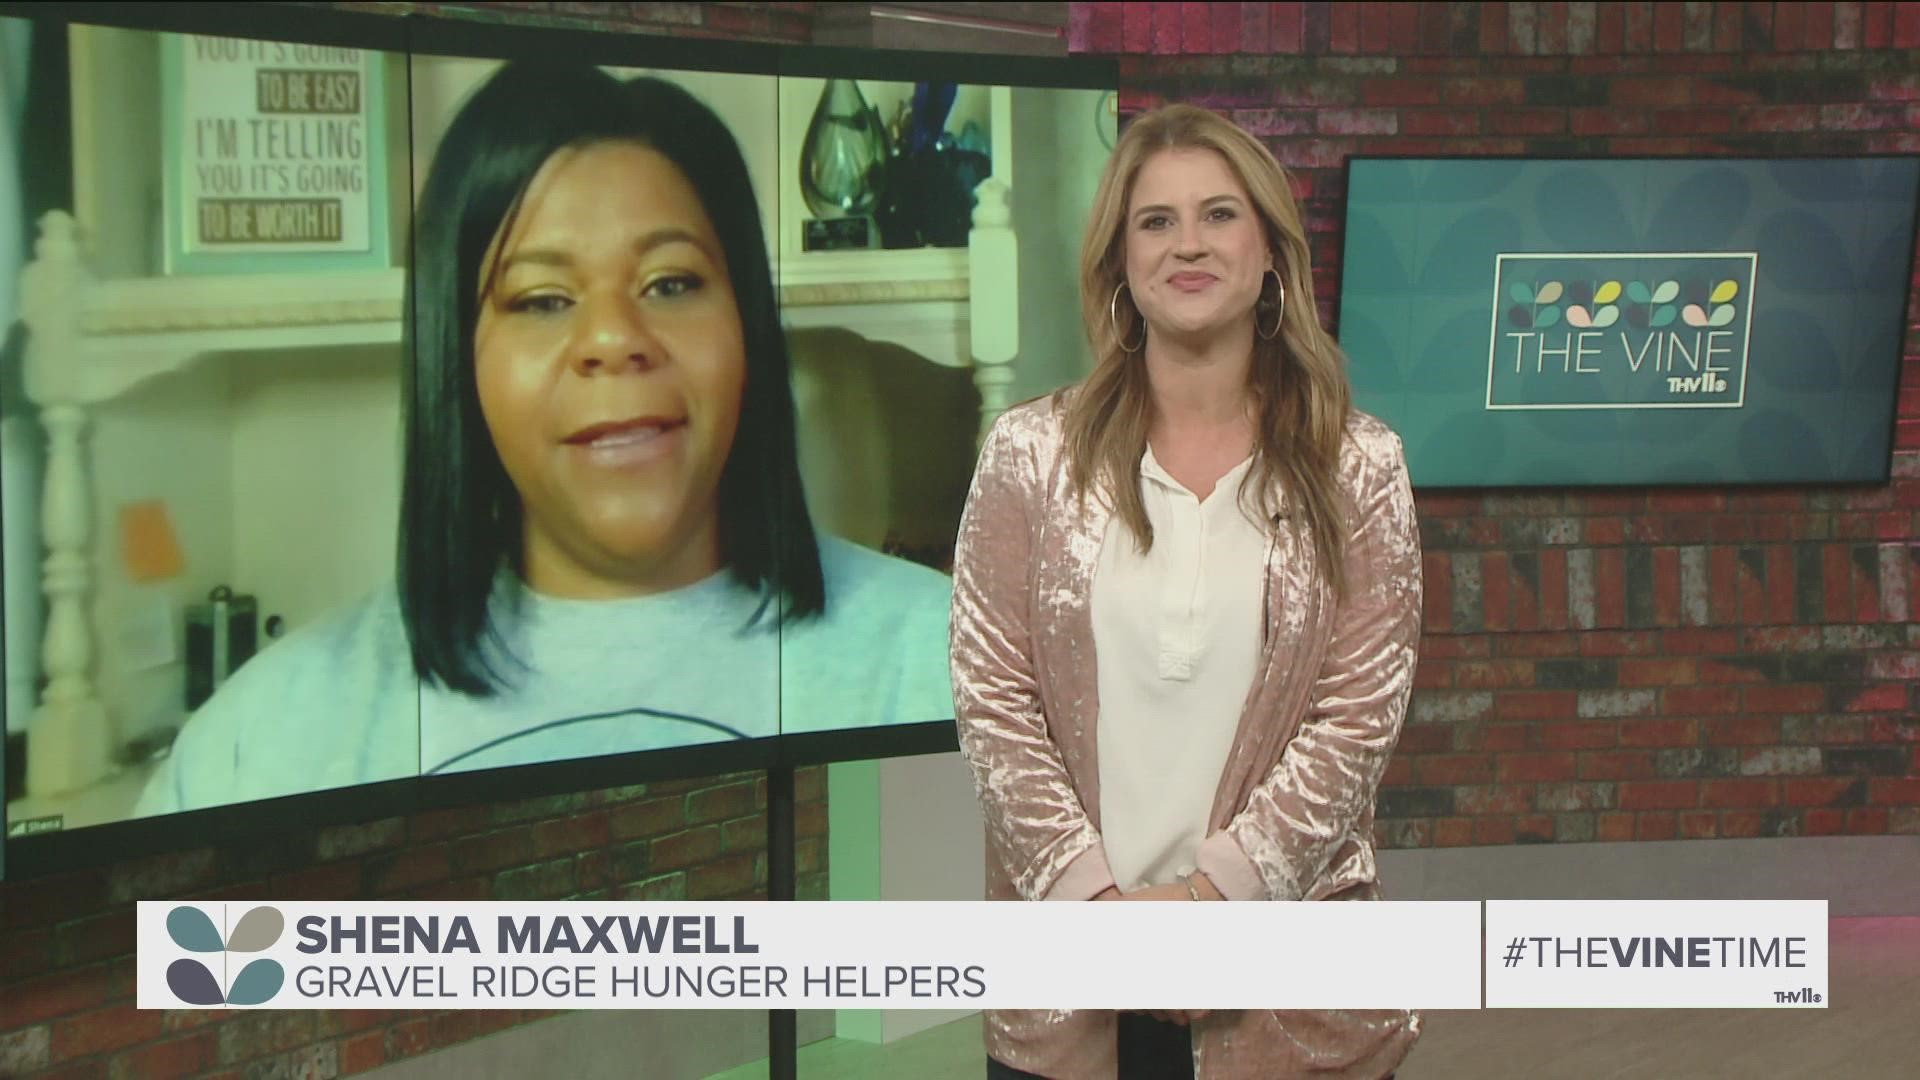 Shena Maxwell, founder of Gravel Ridge Hunger Helpers, shares how their organization helps feed people within our community.